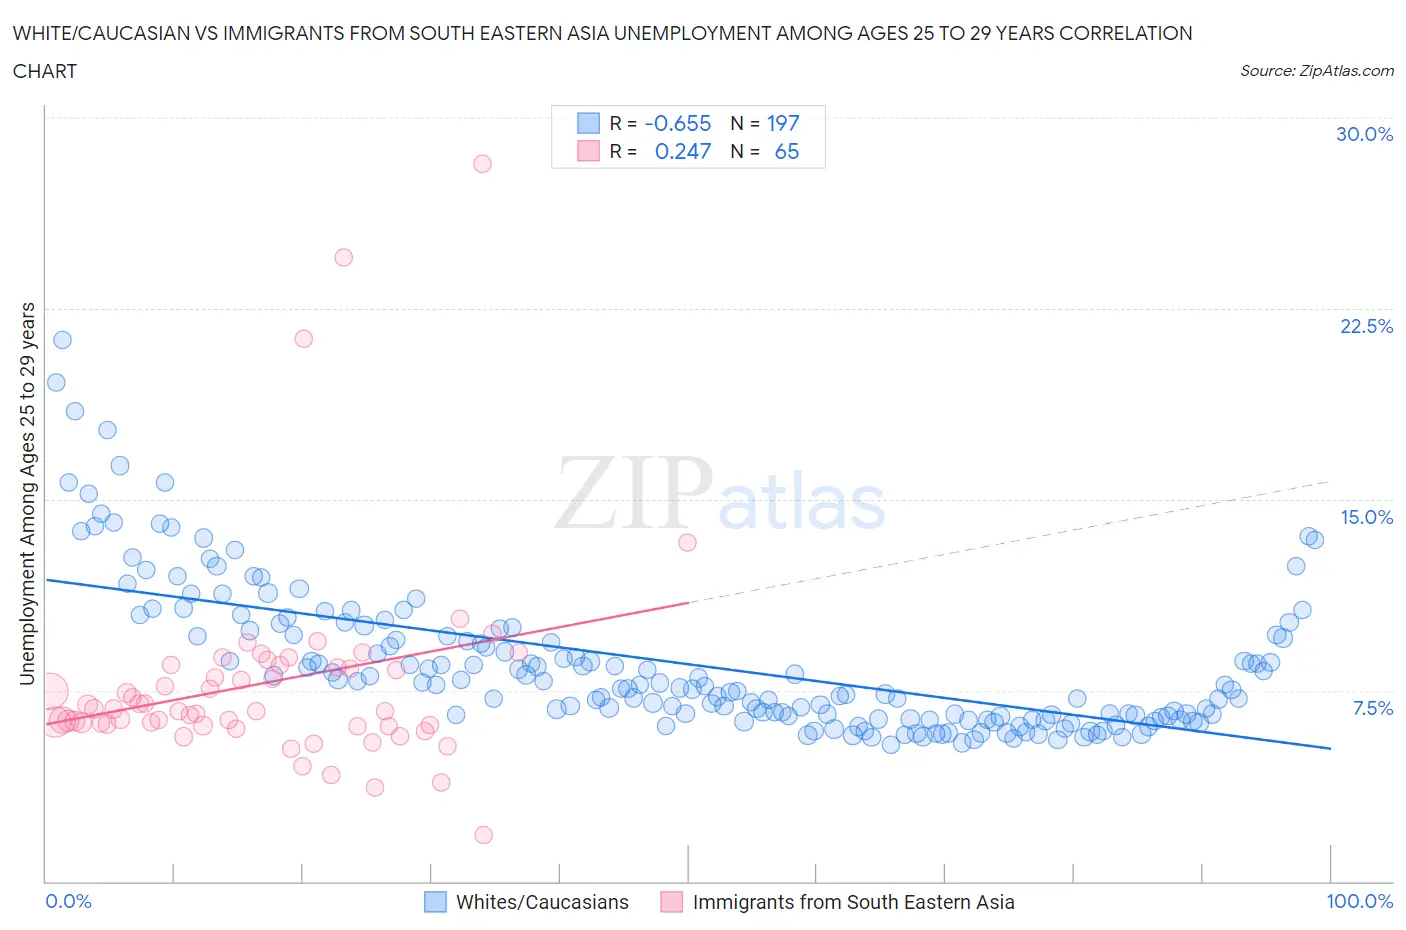 White/Caucasian vs Immigrants from South Eastern Asia Unemployment Among Ages 25 to 29 years